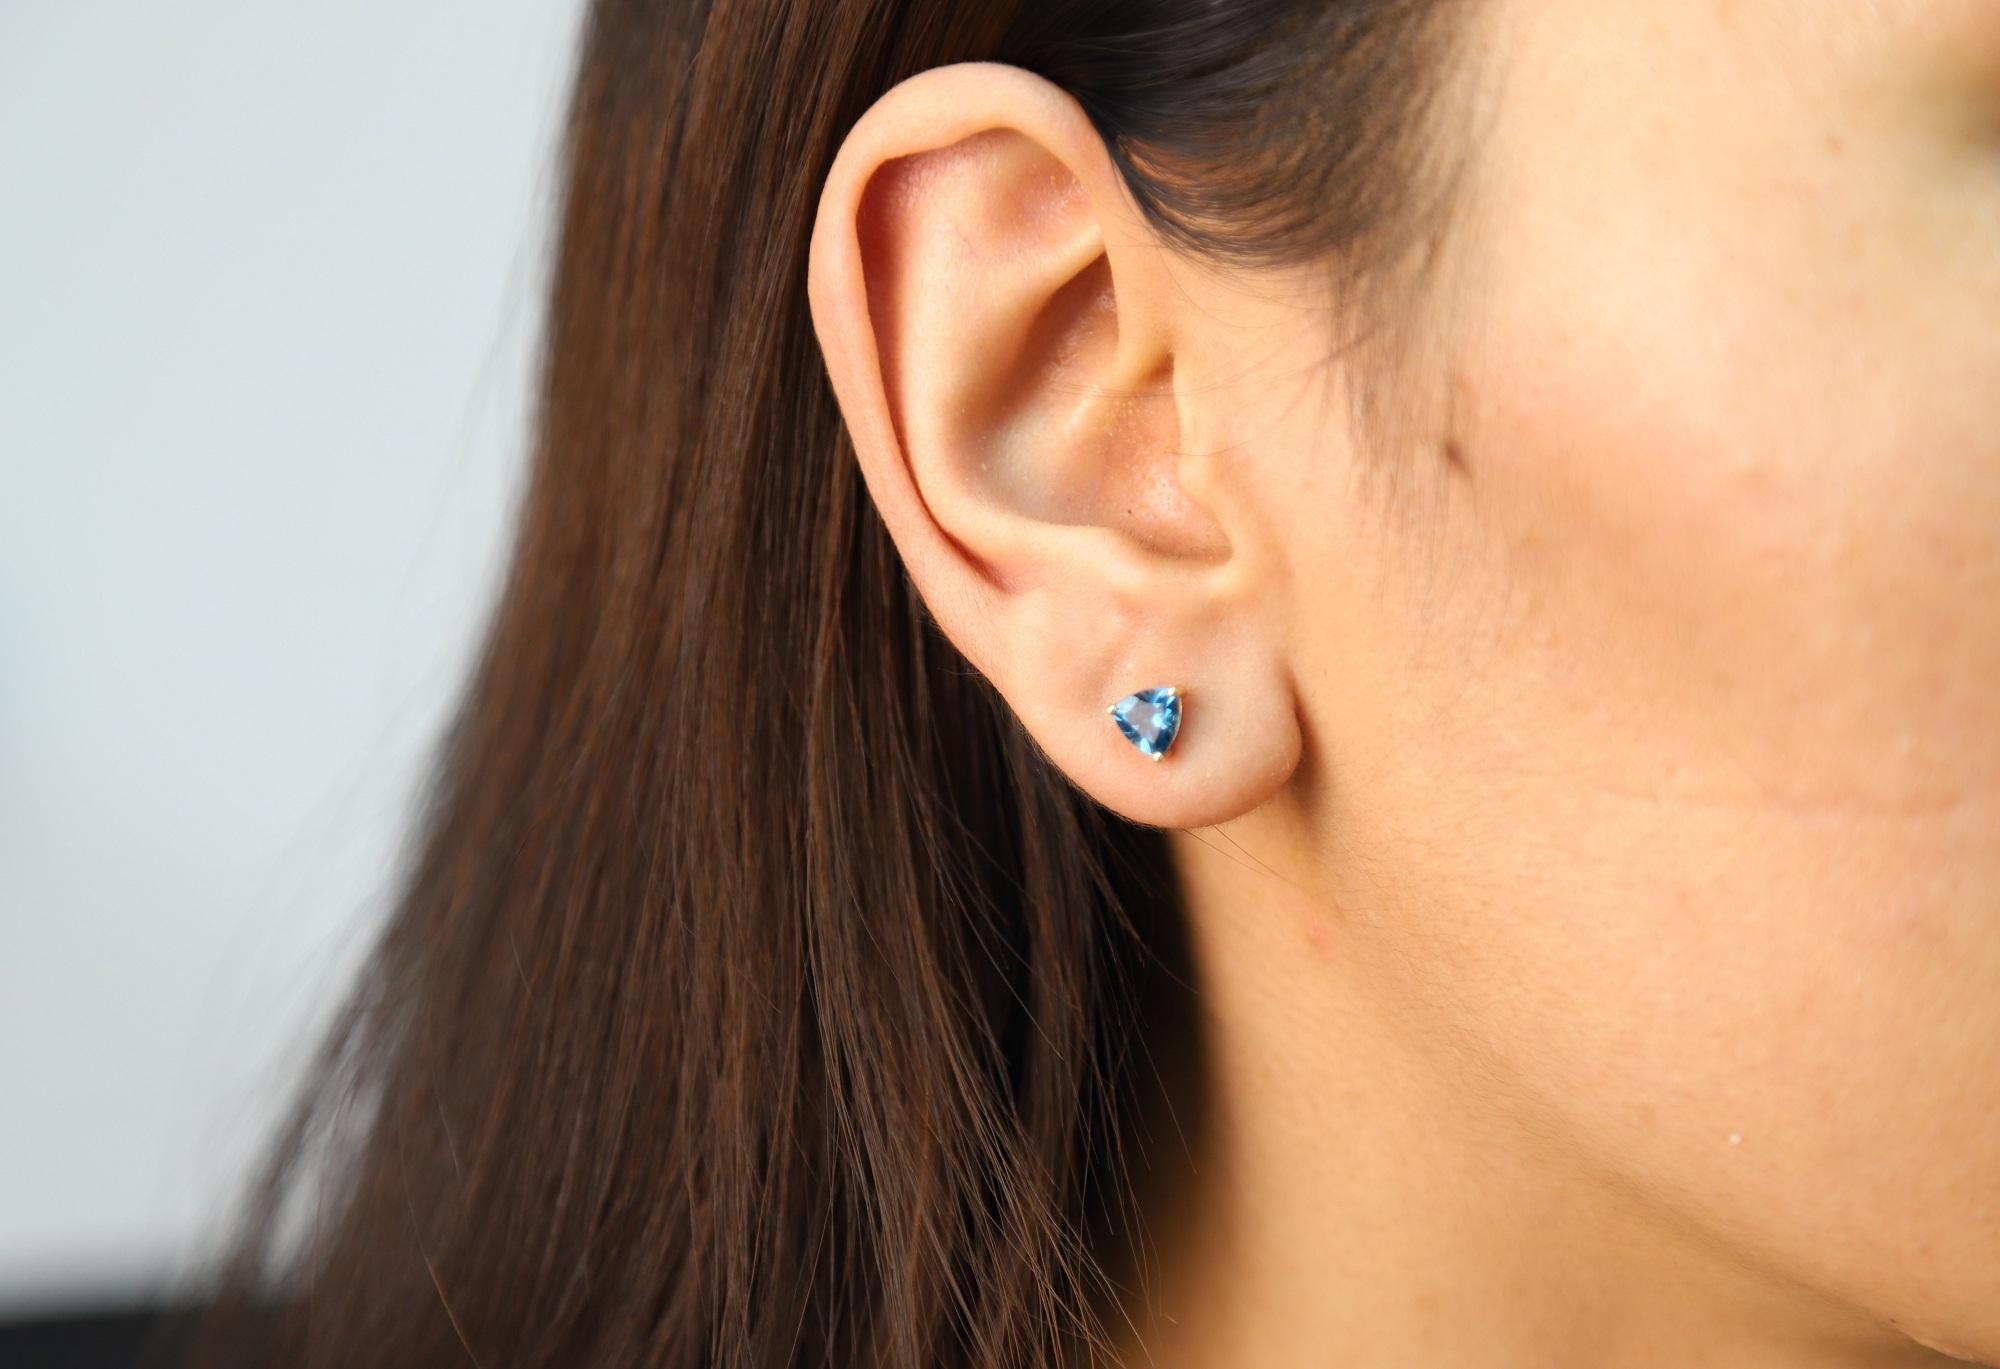 Decorate yourself in elegance with this Earring is crafted from 14-karat Yellow Gold by Gin & Grace Earring. It creates a contemporary look with these sparkling London Blue Topaz stud earrings. This Earring is made up of 6MM Trillion-Cut Prong